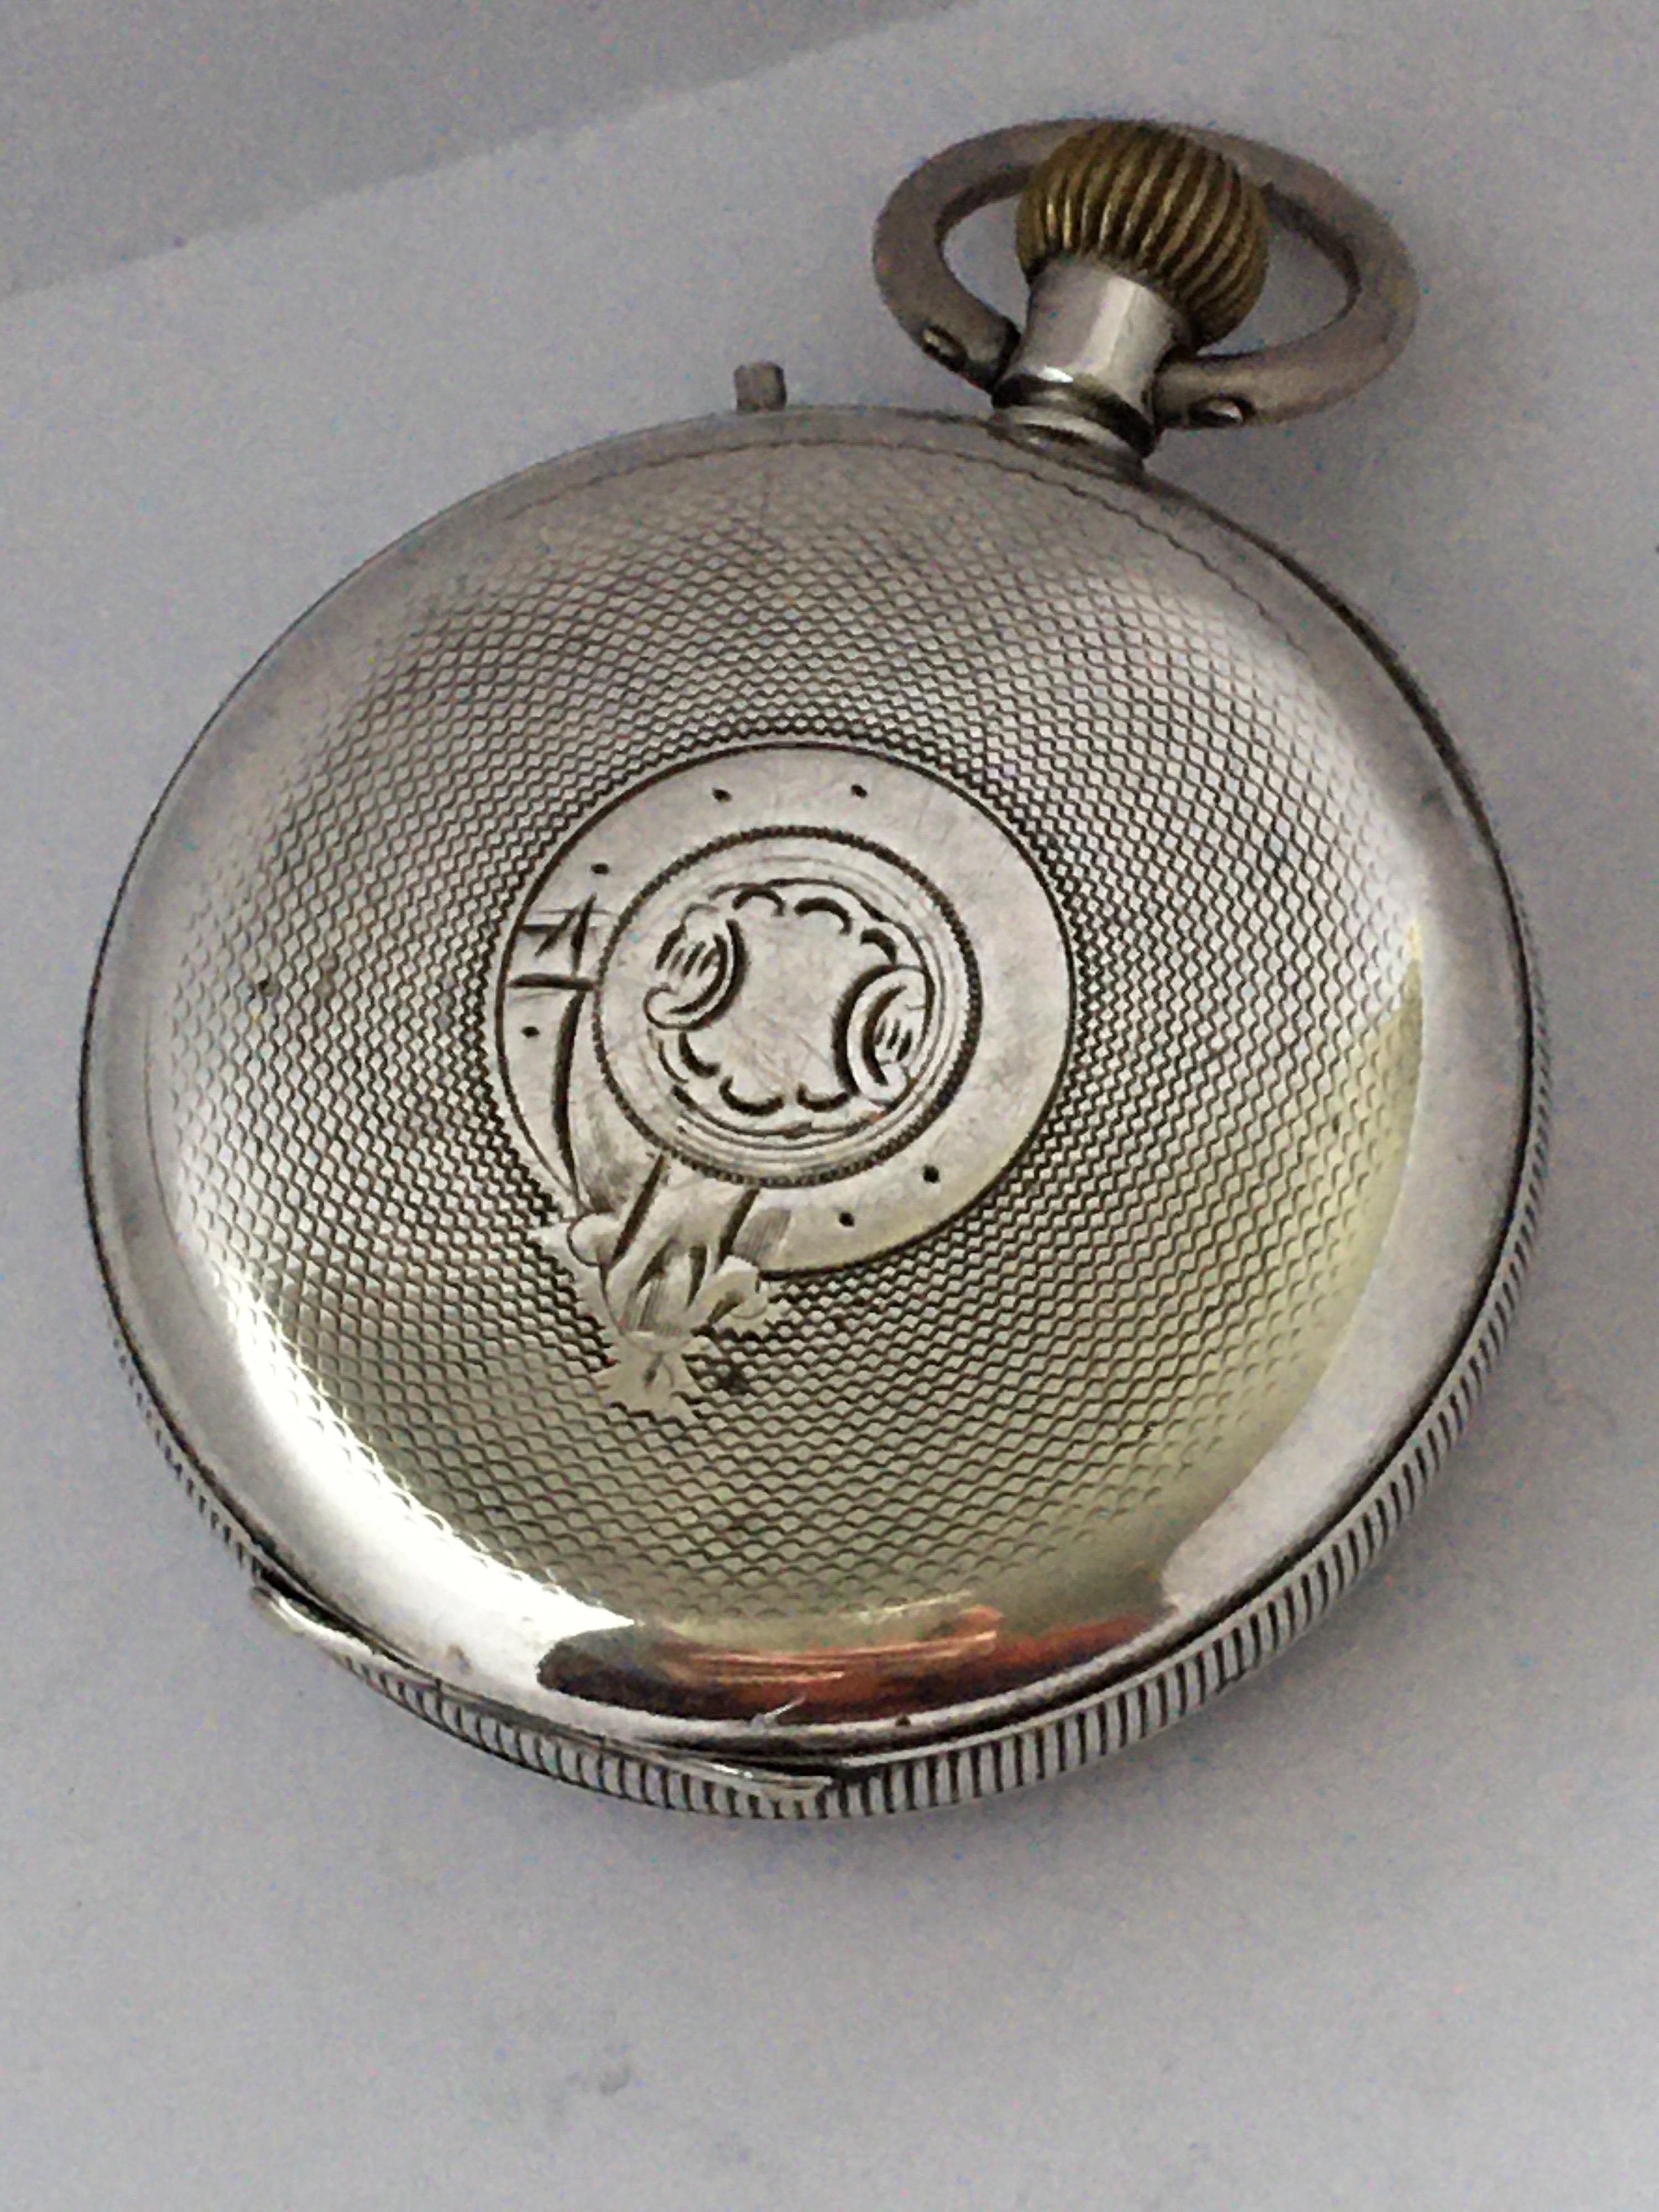 This beautiful antique silver stem-winding pocket watch signed Le Roí on the dial is in good working condition and it is ticking well. Visible crack across the enamel dial as shown. Tiny dents, light scratches on the engine turned silver case.